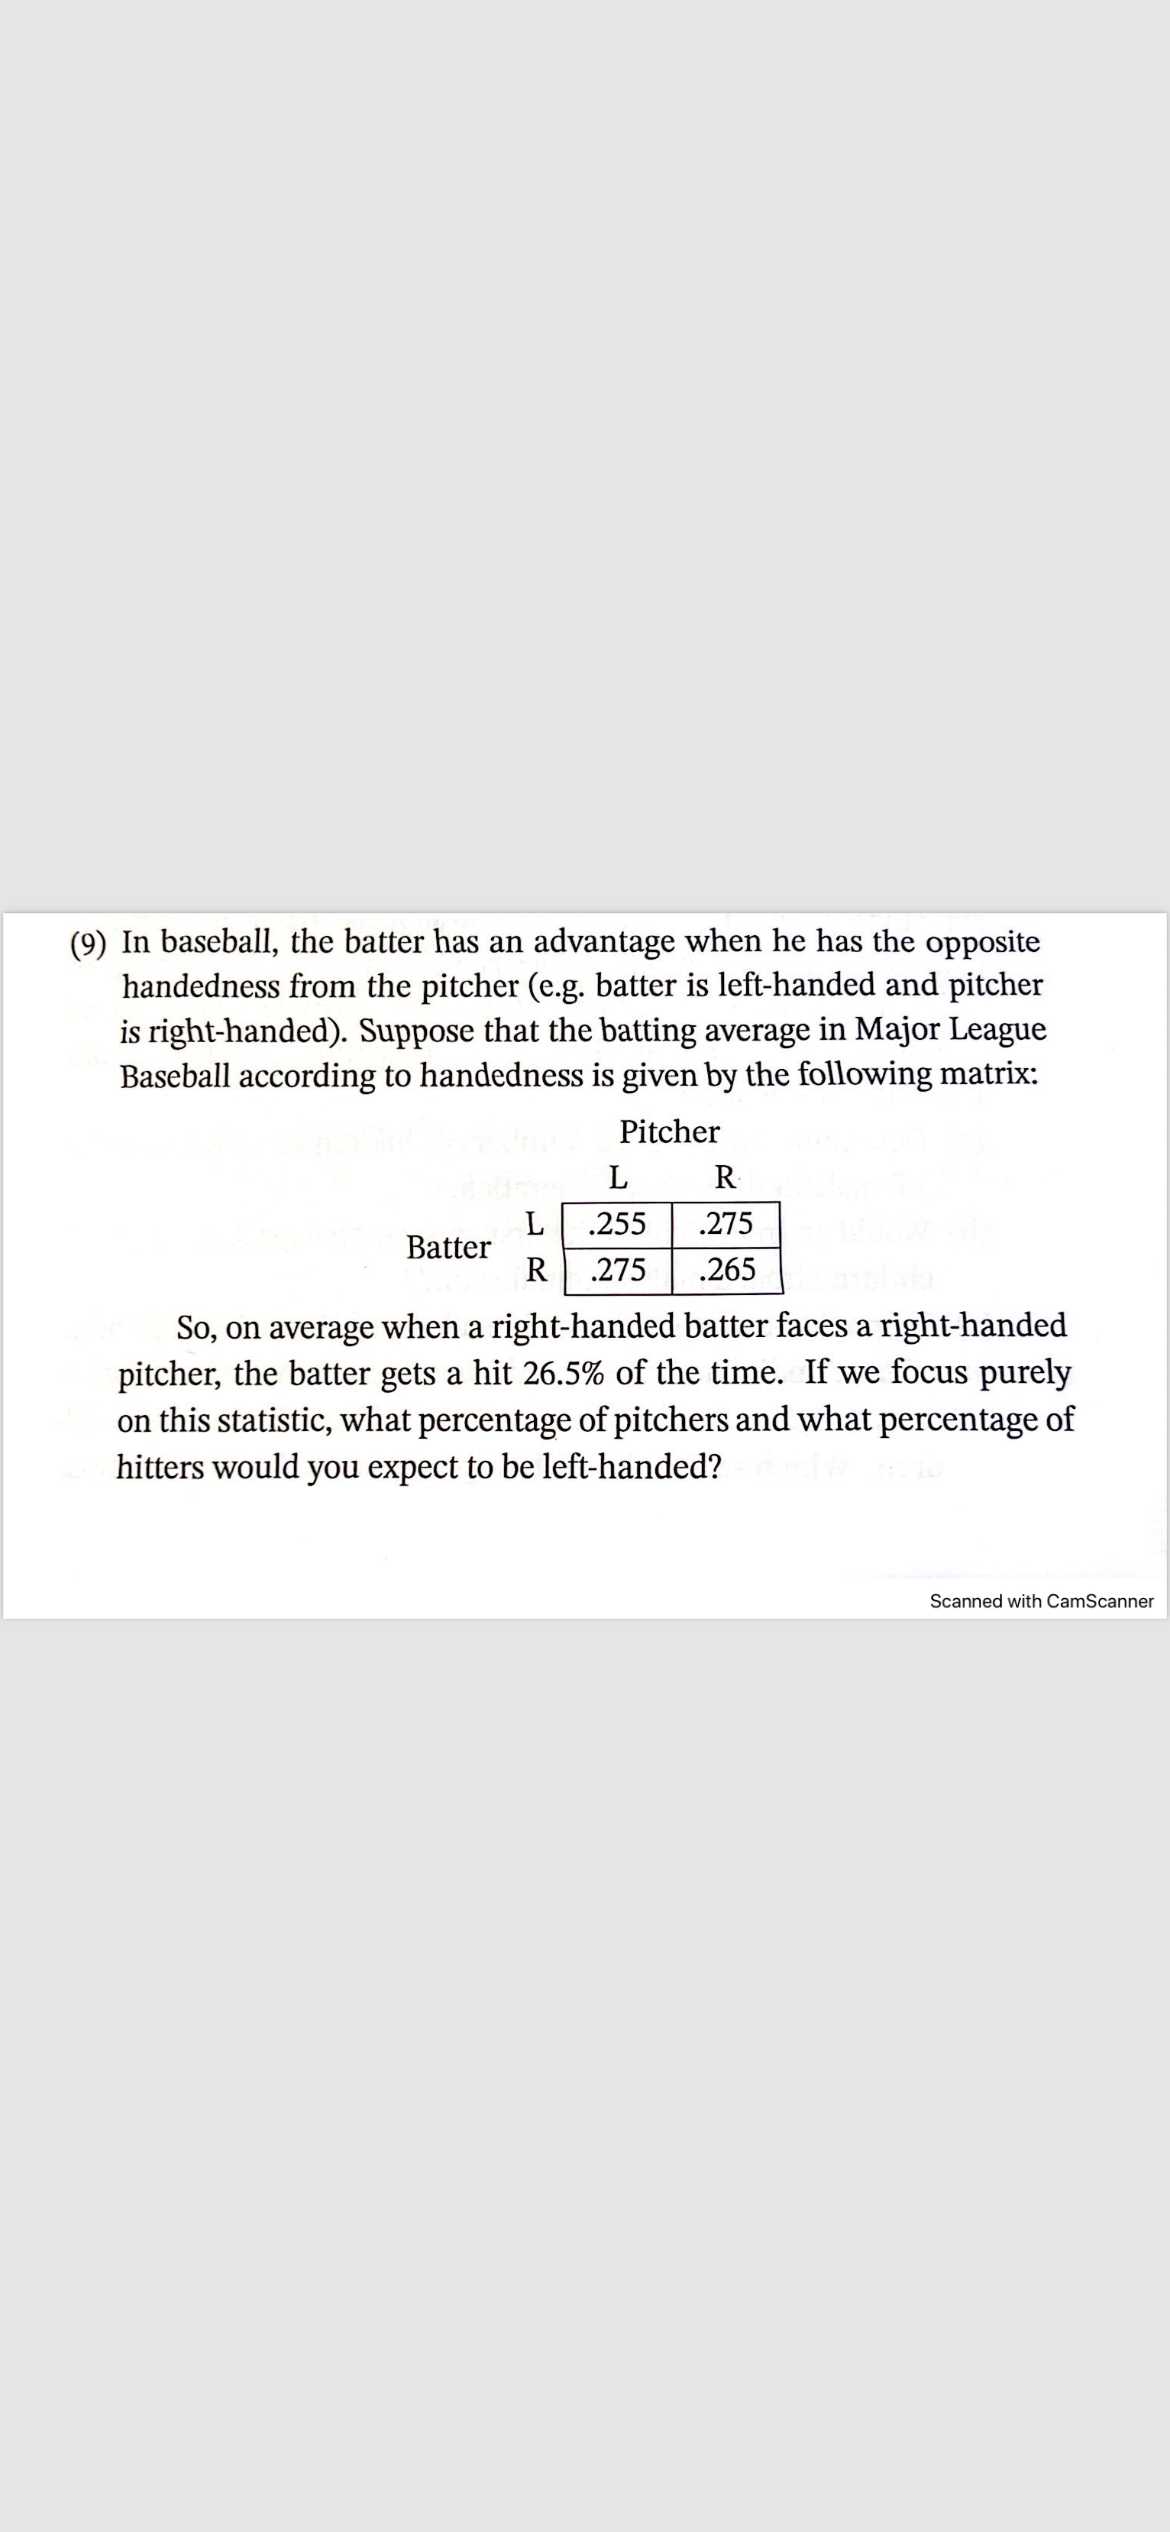 In baseball, the batter has an advantage when he has the opposite
handedness from the pitcher (e.g. batter is left-handed and pitcher
is right-handed). Suppose that the batting average in Major League
Baseball according to handedness is given by the following matrix:
Pitcher
L
R
L .255 .275
Batter
R .275
.265
So, on average when a right-handed batter faces a right-handed
pitcher, the batter gets a hit 26.5% of the time. If we focus purely
on this statistic, what percentage of pitchers and what percentage of
hitters would you expect to be left-handed?
Scanned with CamScanner